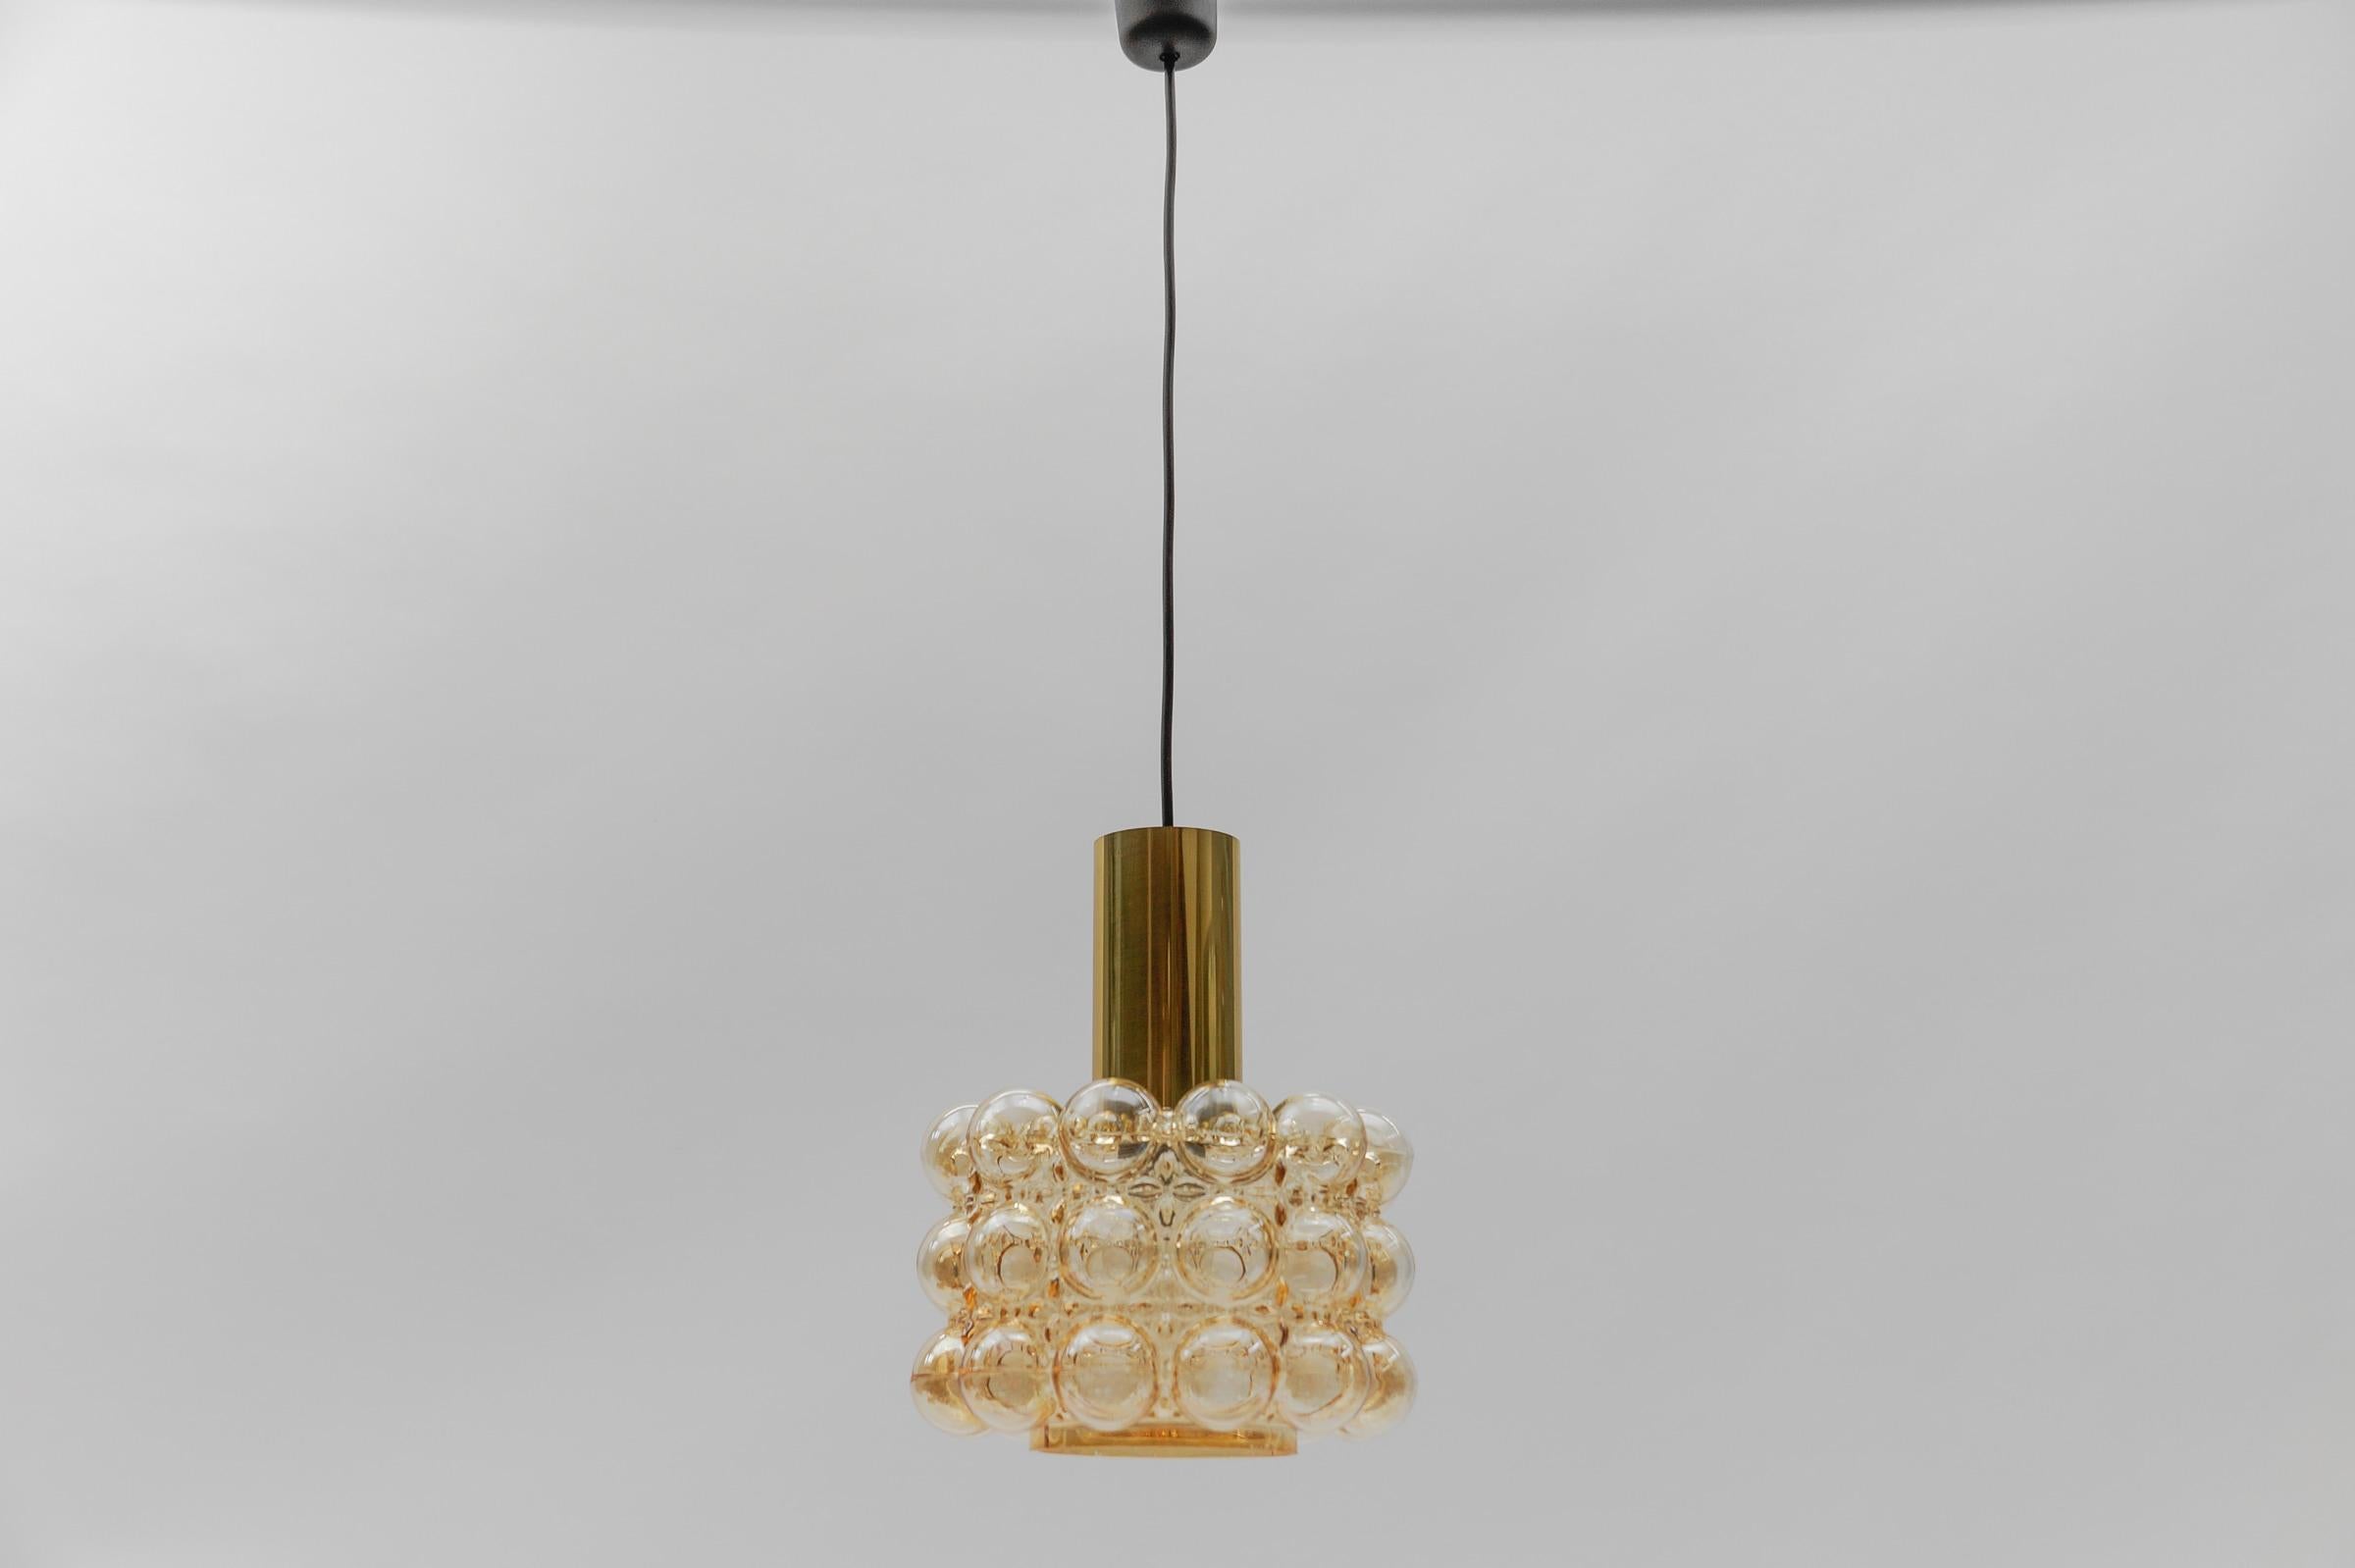 1 of 2 Amber Bubble Glass Ceiling Lamp by Helena Tynell for Limburg, Germany 1960s

Dimensions
Height: 33.46 in. (85 cm)
Diameter: 10.23 in. (26 cm)

The fixture need 1 x E27 standard bulb with 60W max.

Light bulbs are not included. 
It is possible